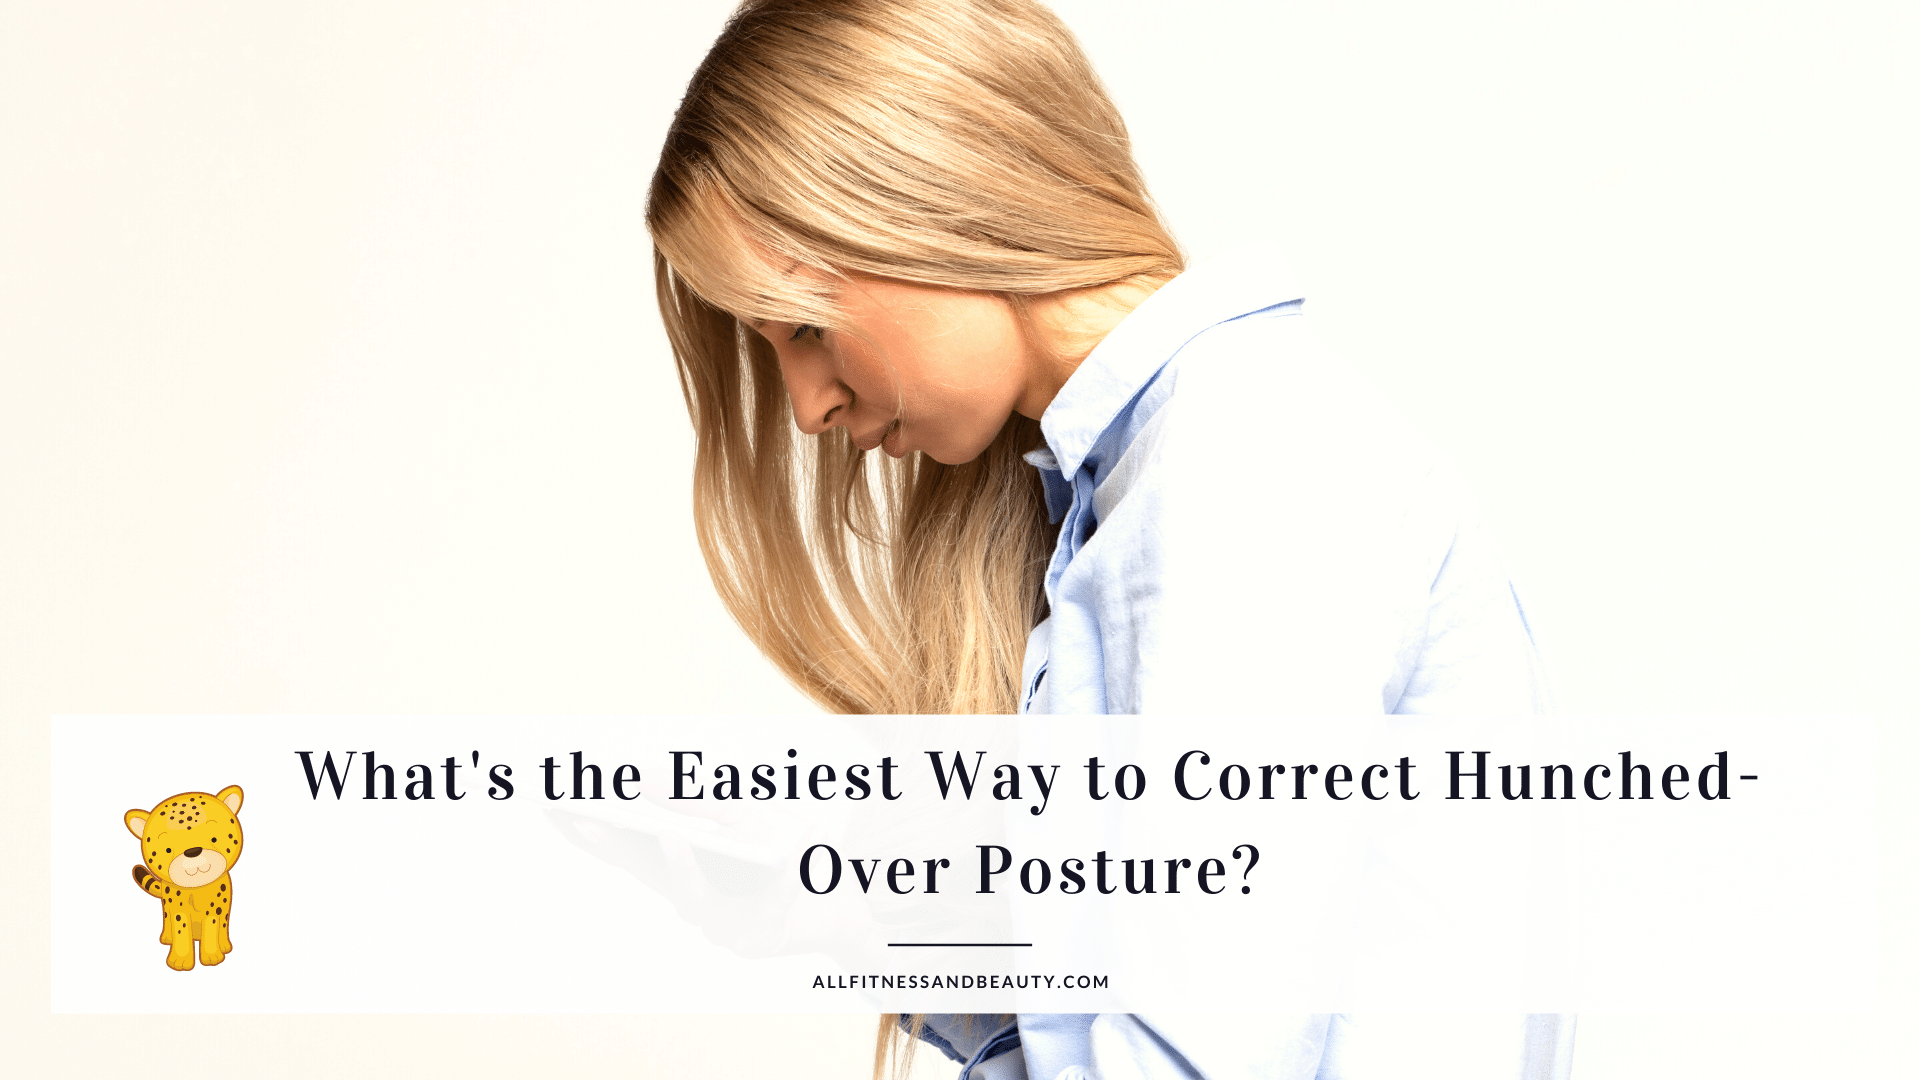 whats the easiest way to correct hunched-over posture